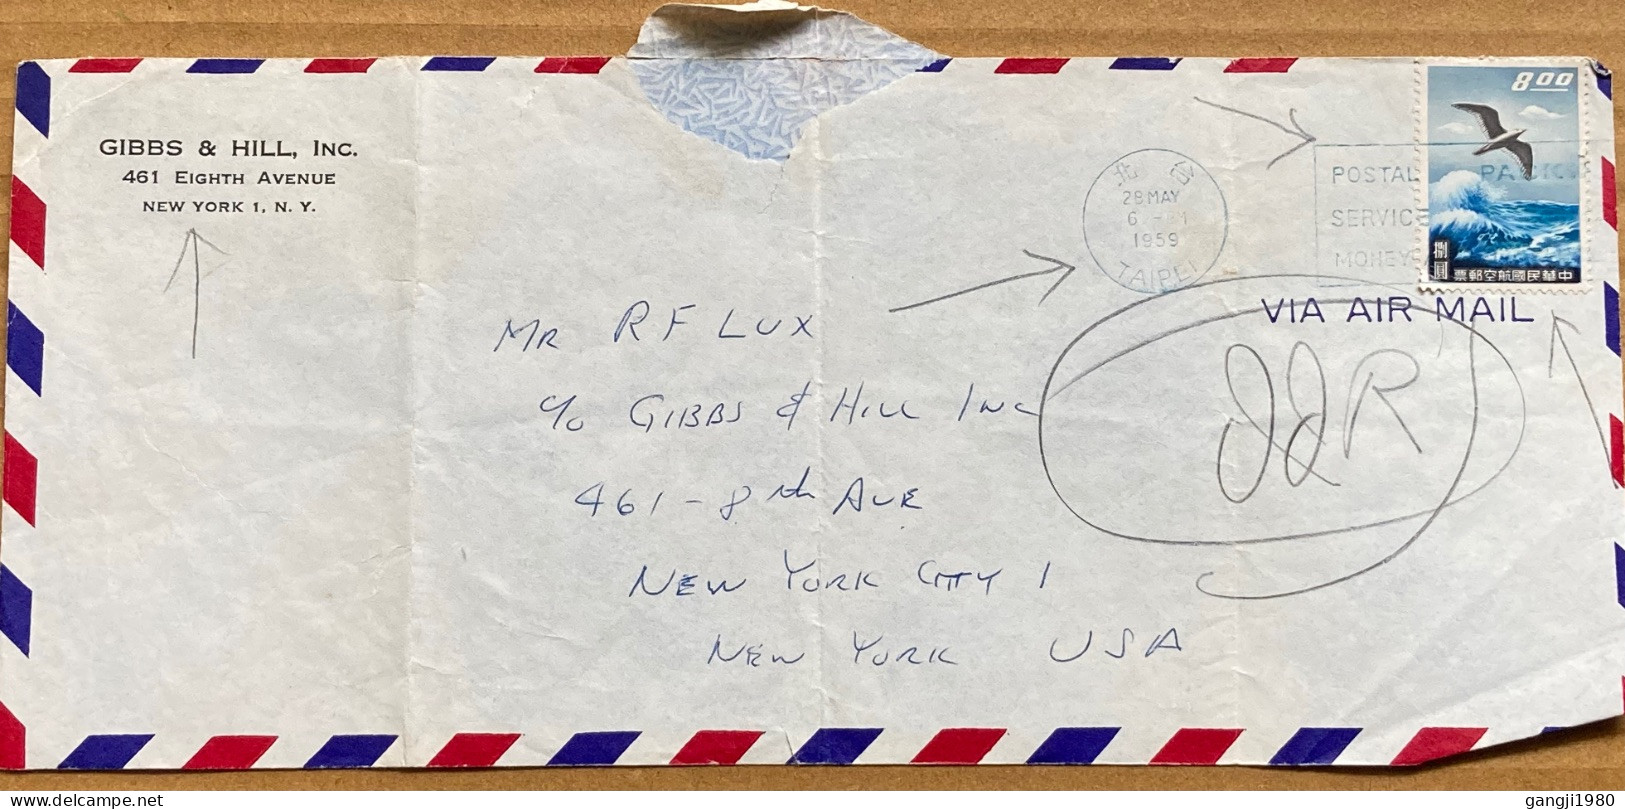 CHINA TAIWAN 1959, COVER USED TO USA, EARLY METER MACHINE, BLUE SLOGAN, POSTAL SERVICE MONEY, SEAGULL BIRD, GIBB'S & HIL - Lettres & Documents